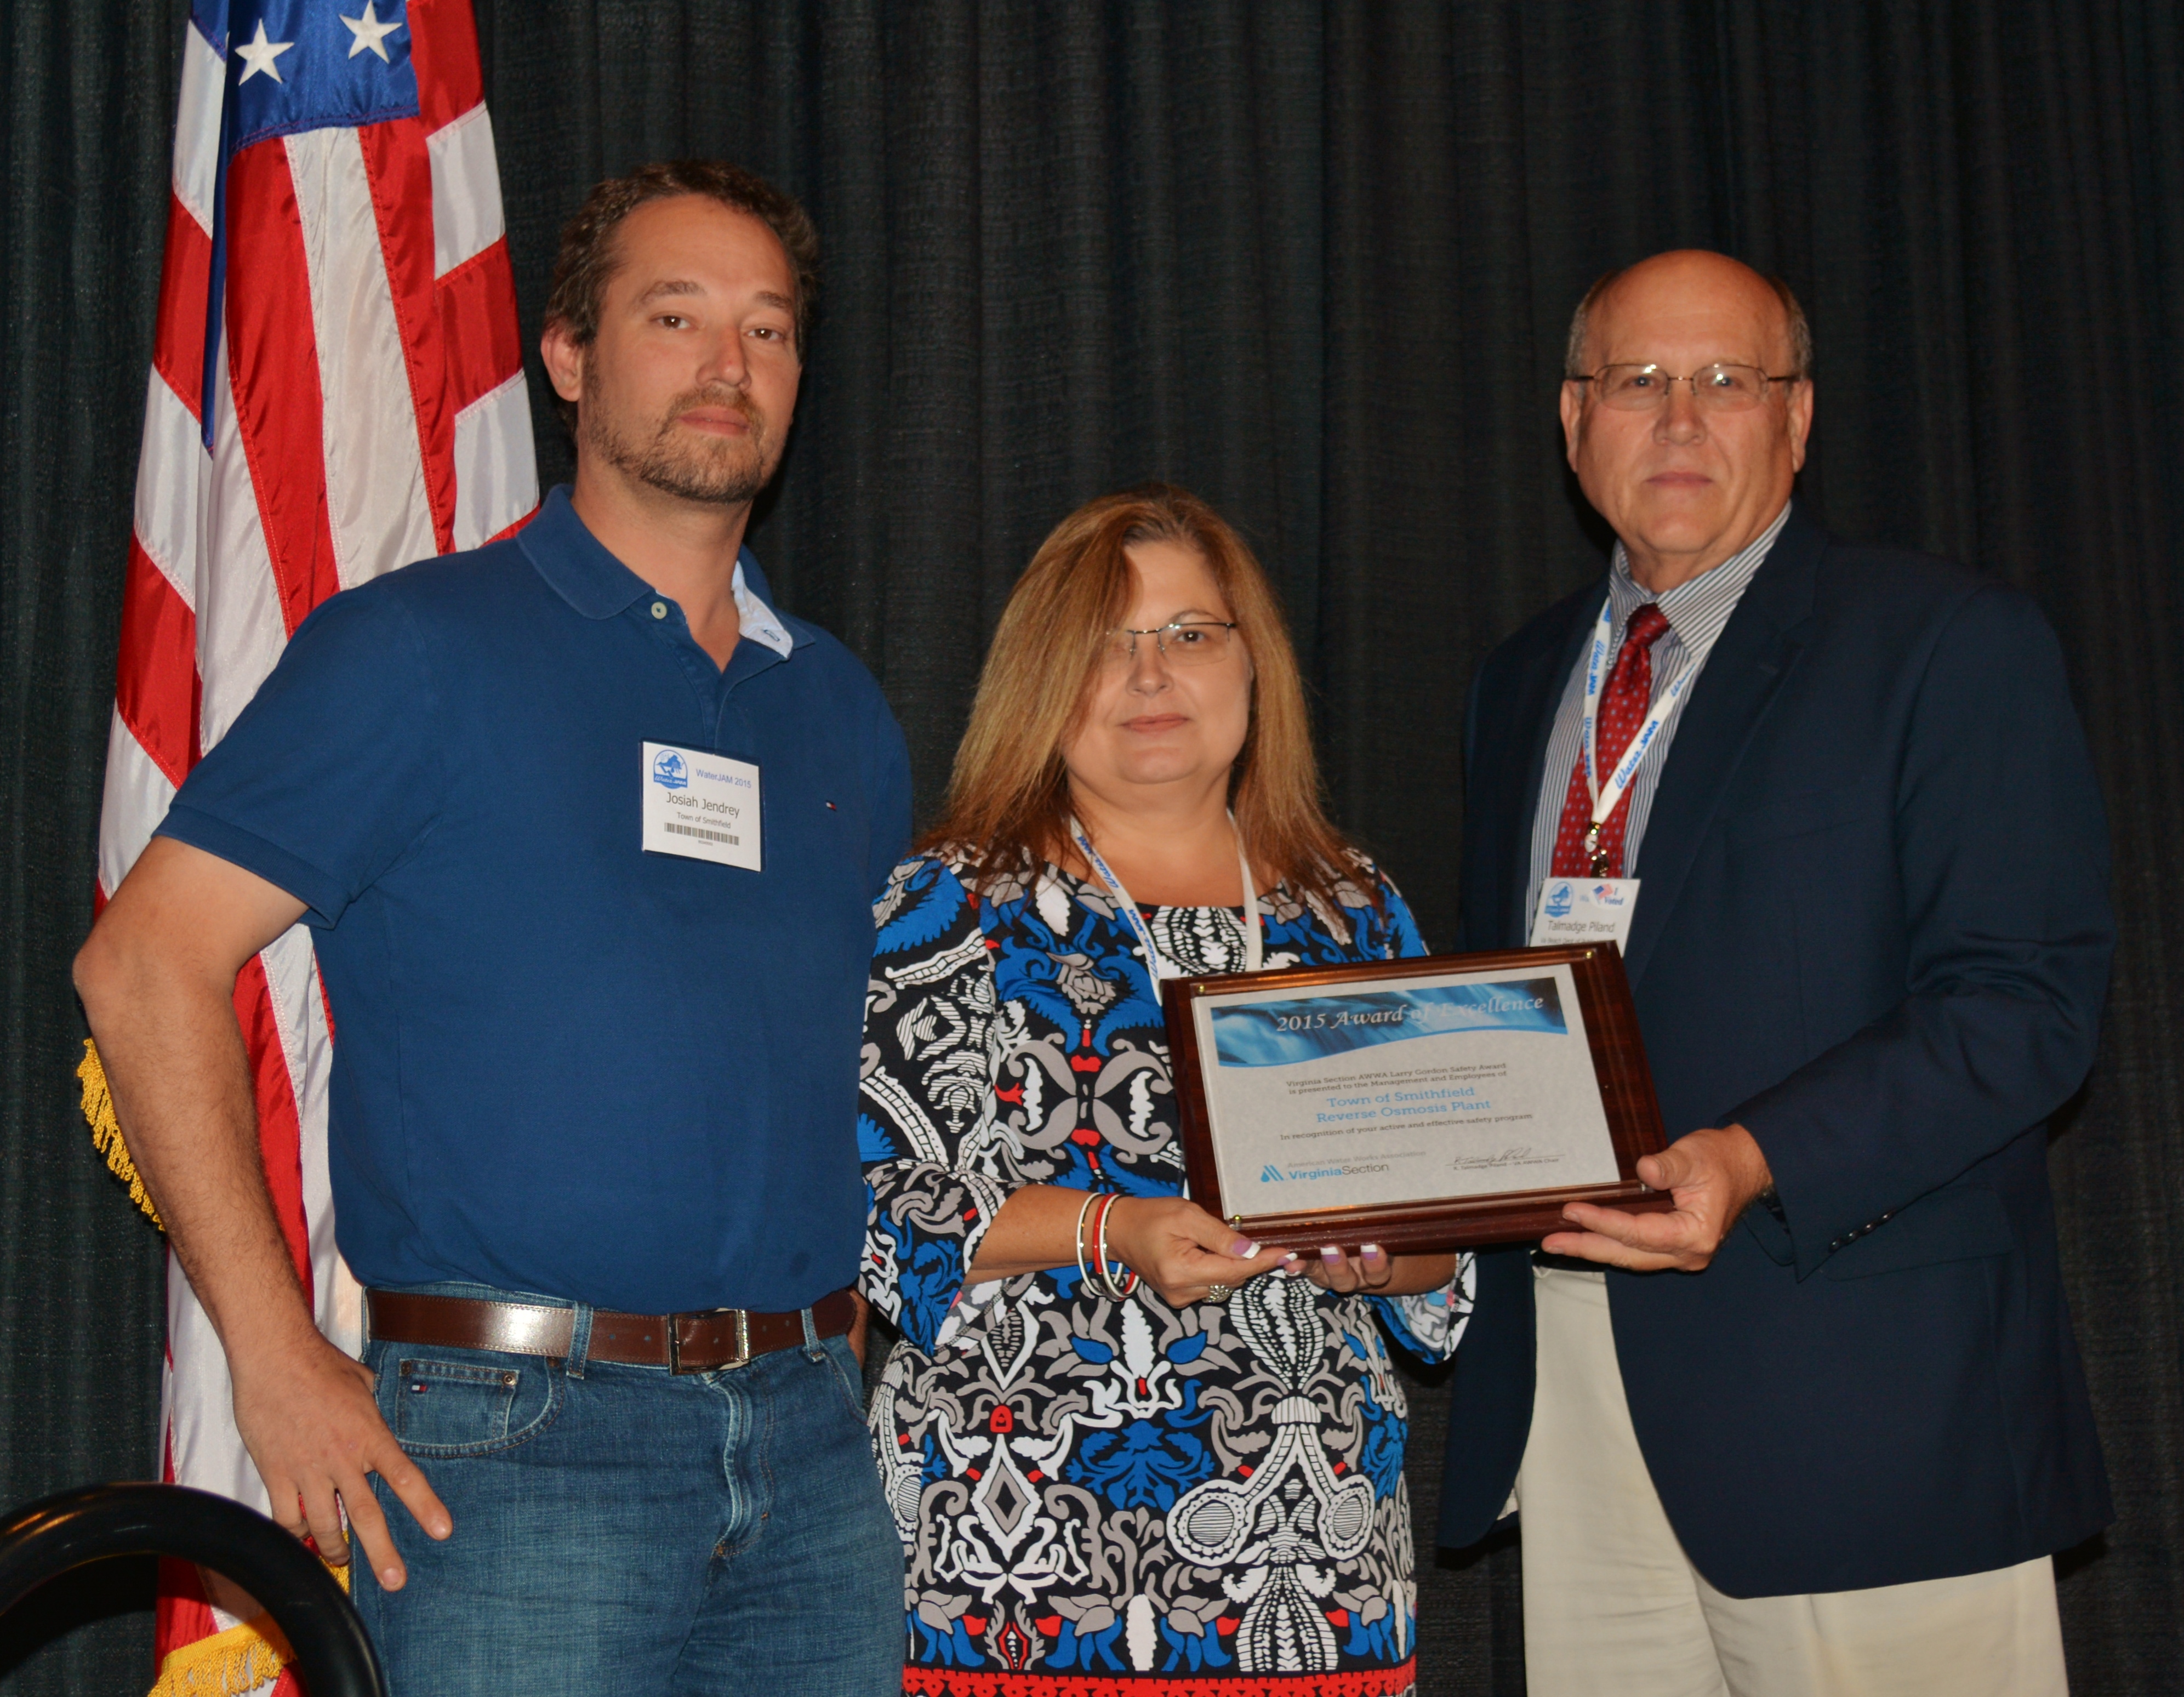 Josiah Jendrey, compliance inspector and Sonja Eubank, planning, engineering and public works with the Town of Smithfield. receive the VA AWWA Larry Gordon Safety Award from Talmadge Piland, chair of the AWWA Virginia Section Board of Trustees